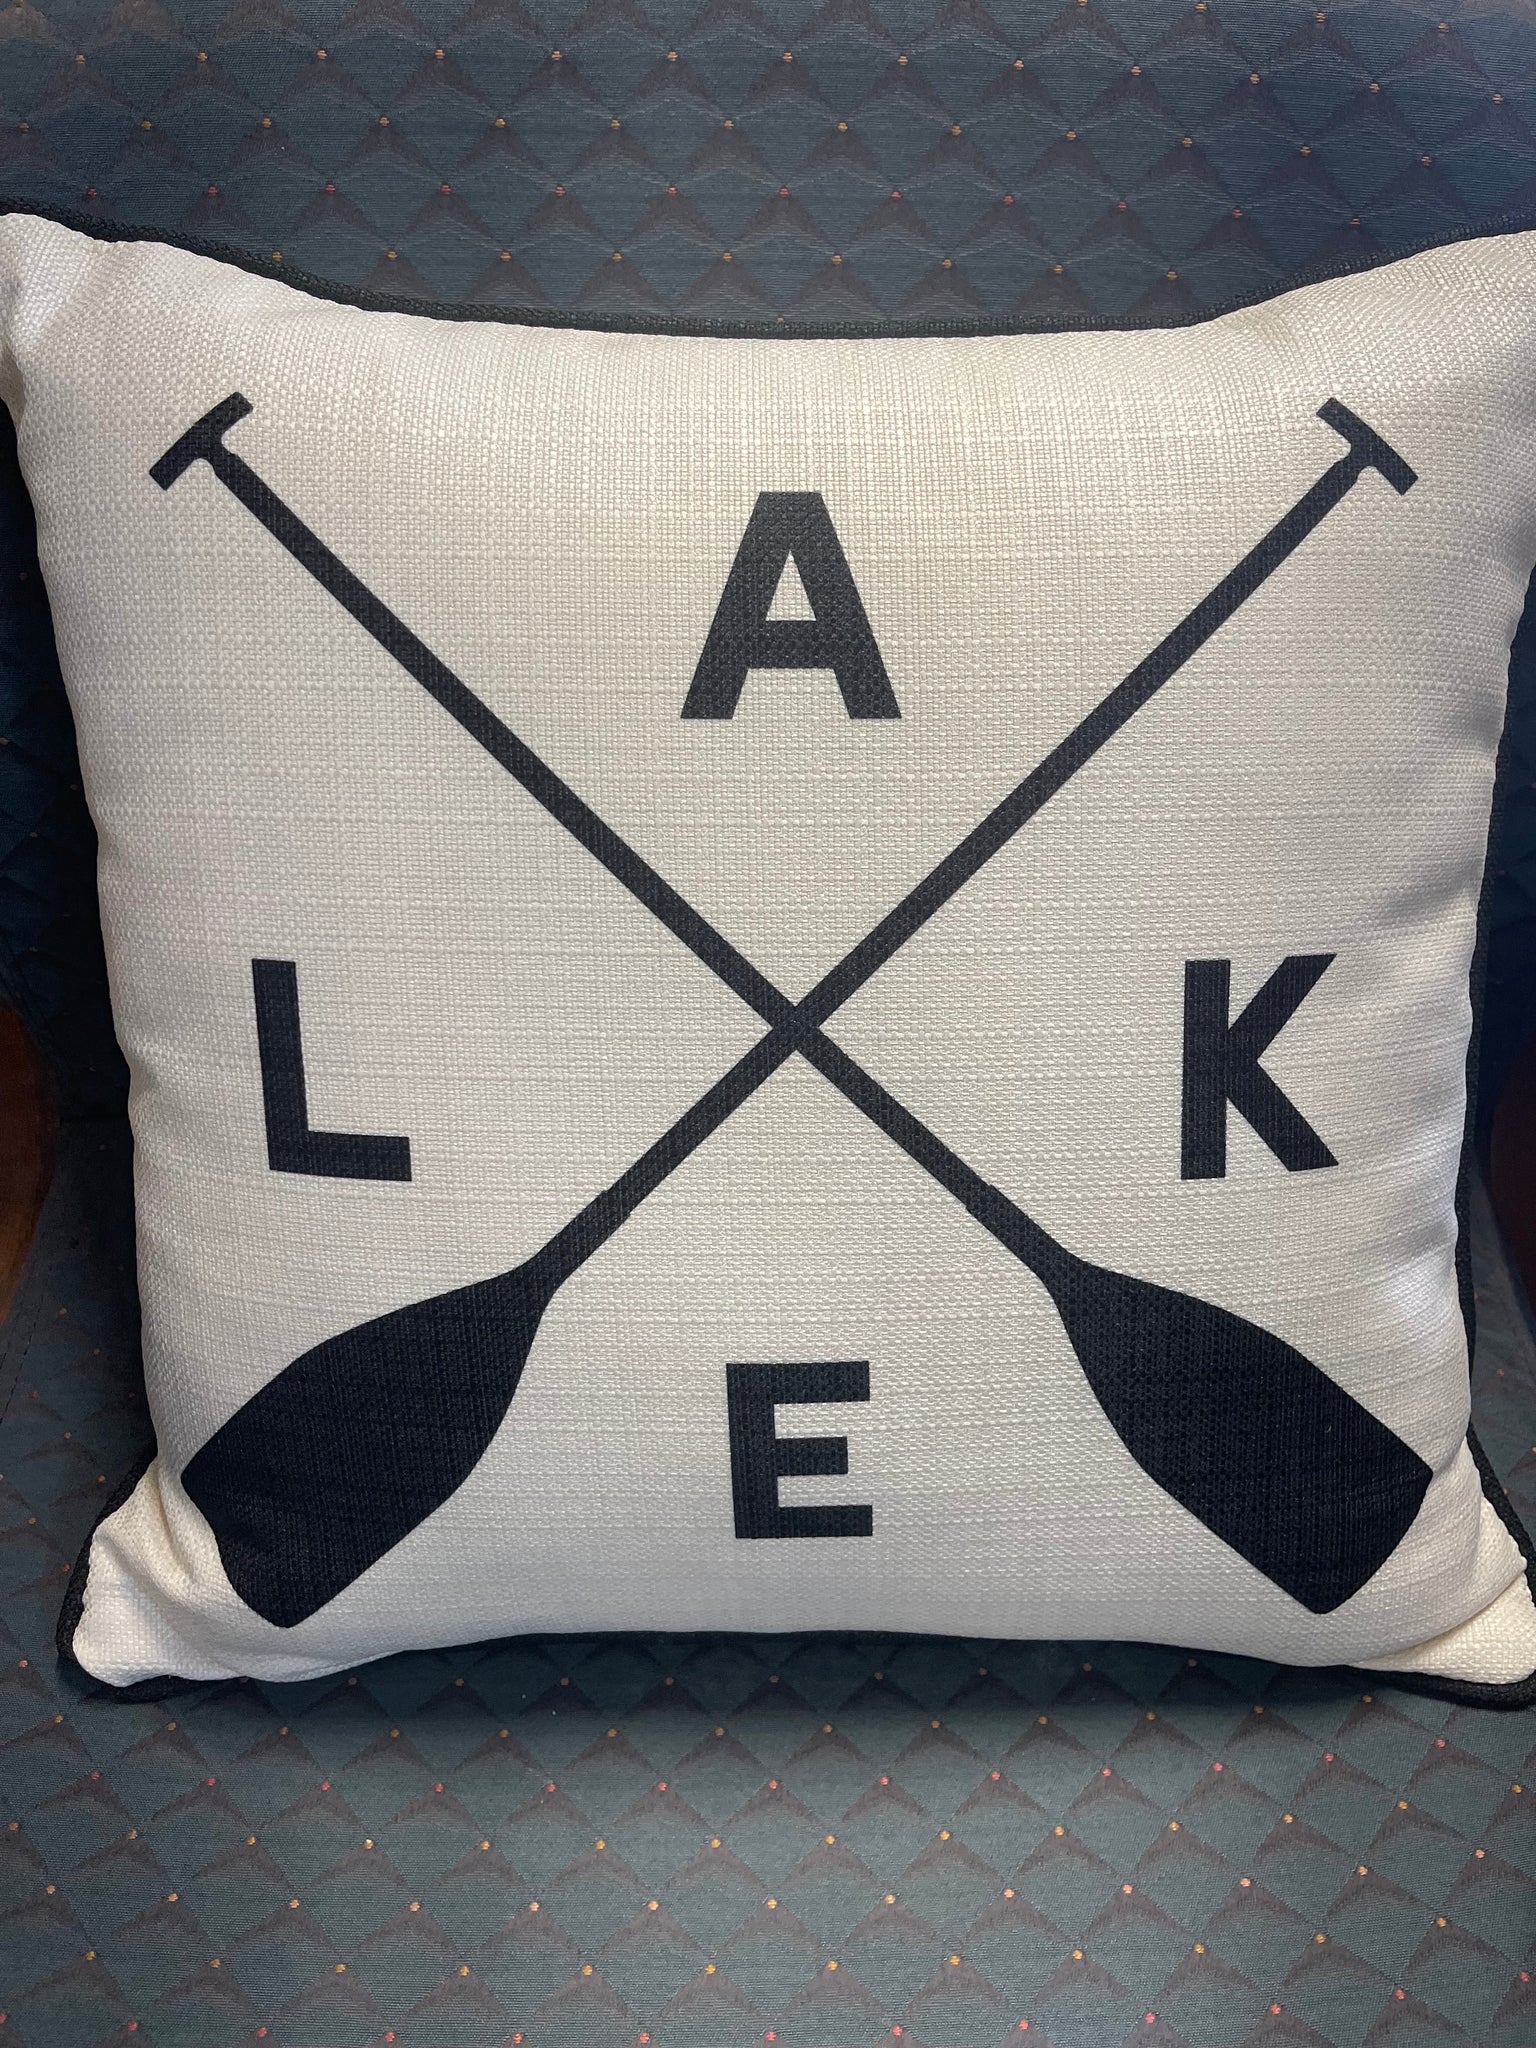 Lake with crossed oars pillow, black piping